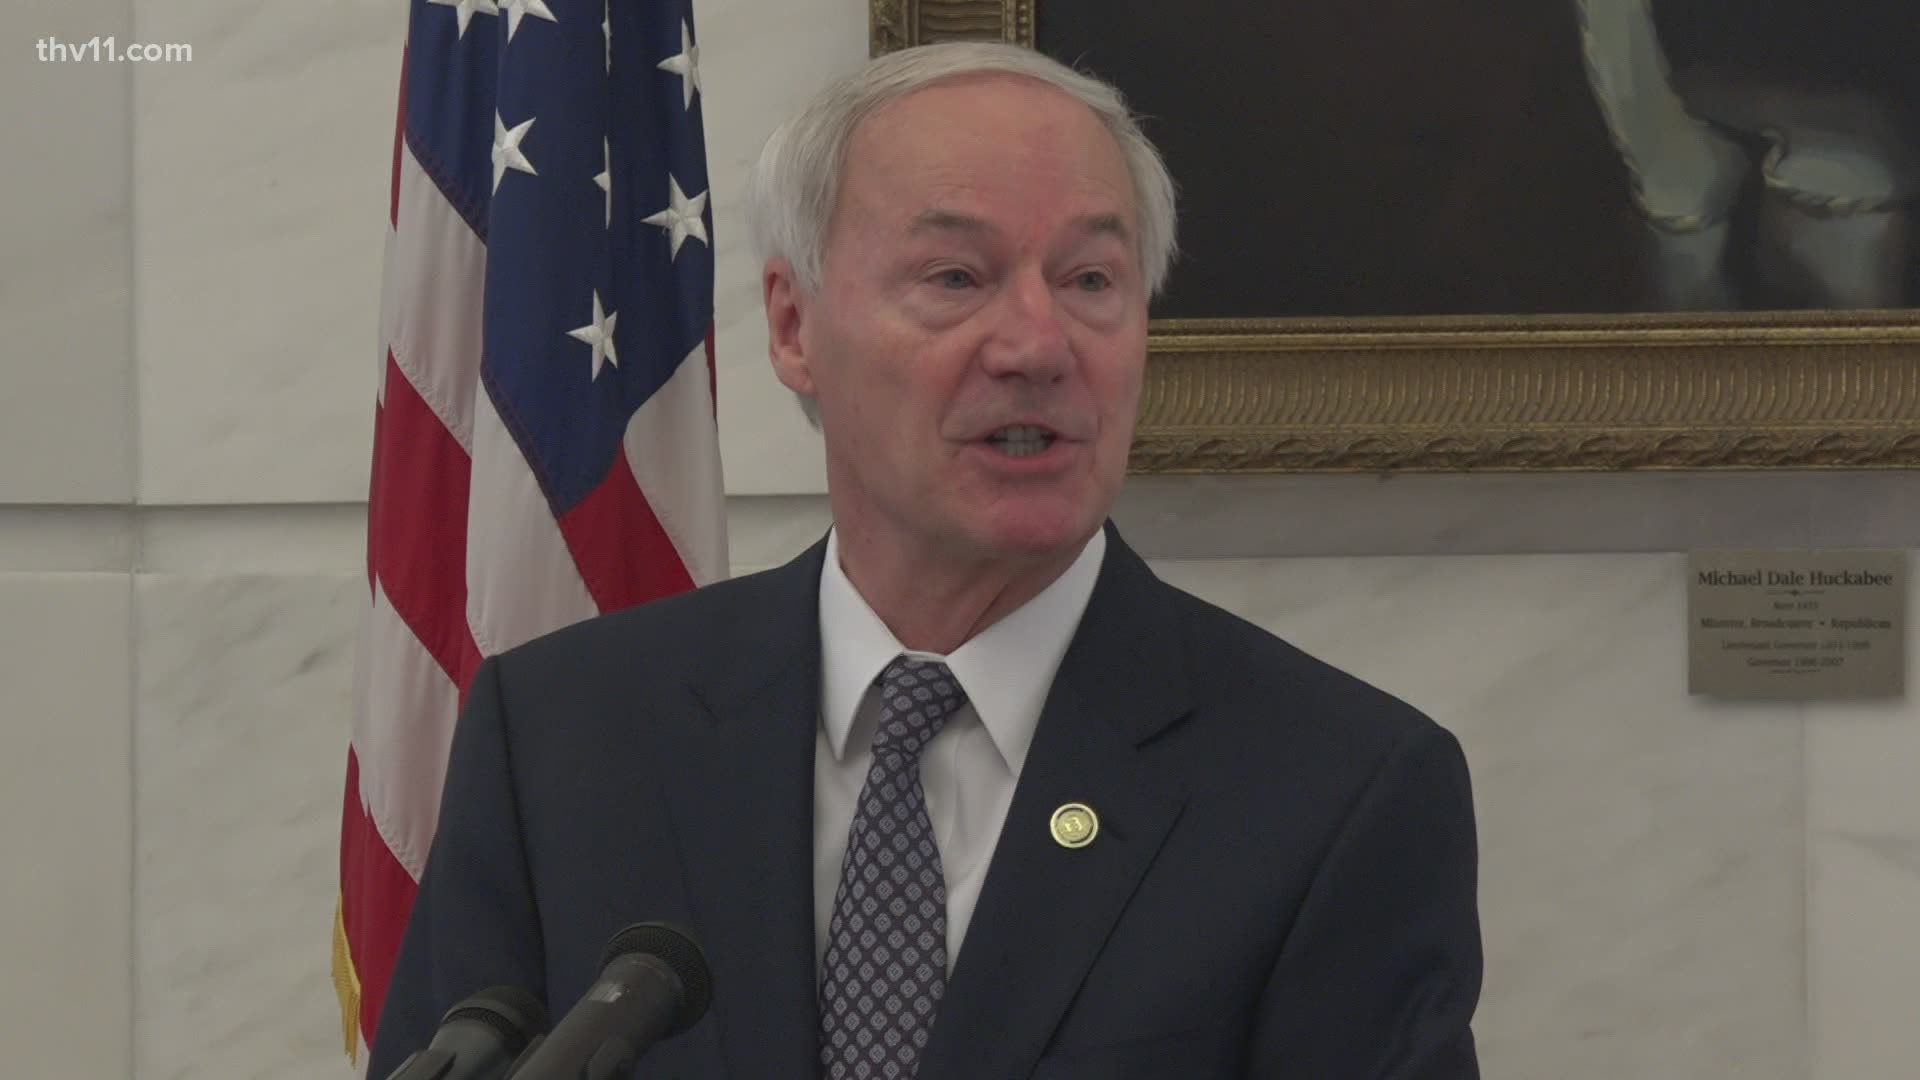 After pushing for it several times last year, the governor led a bipartisan push to create a statewide hate crime law. Arkansas is one of three states without one.